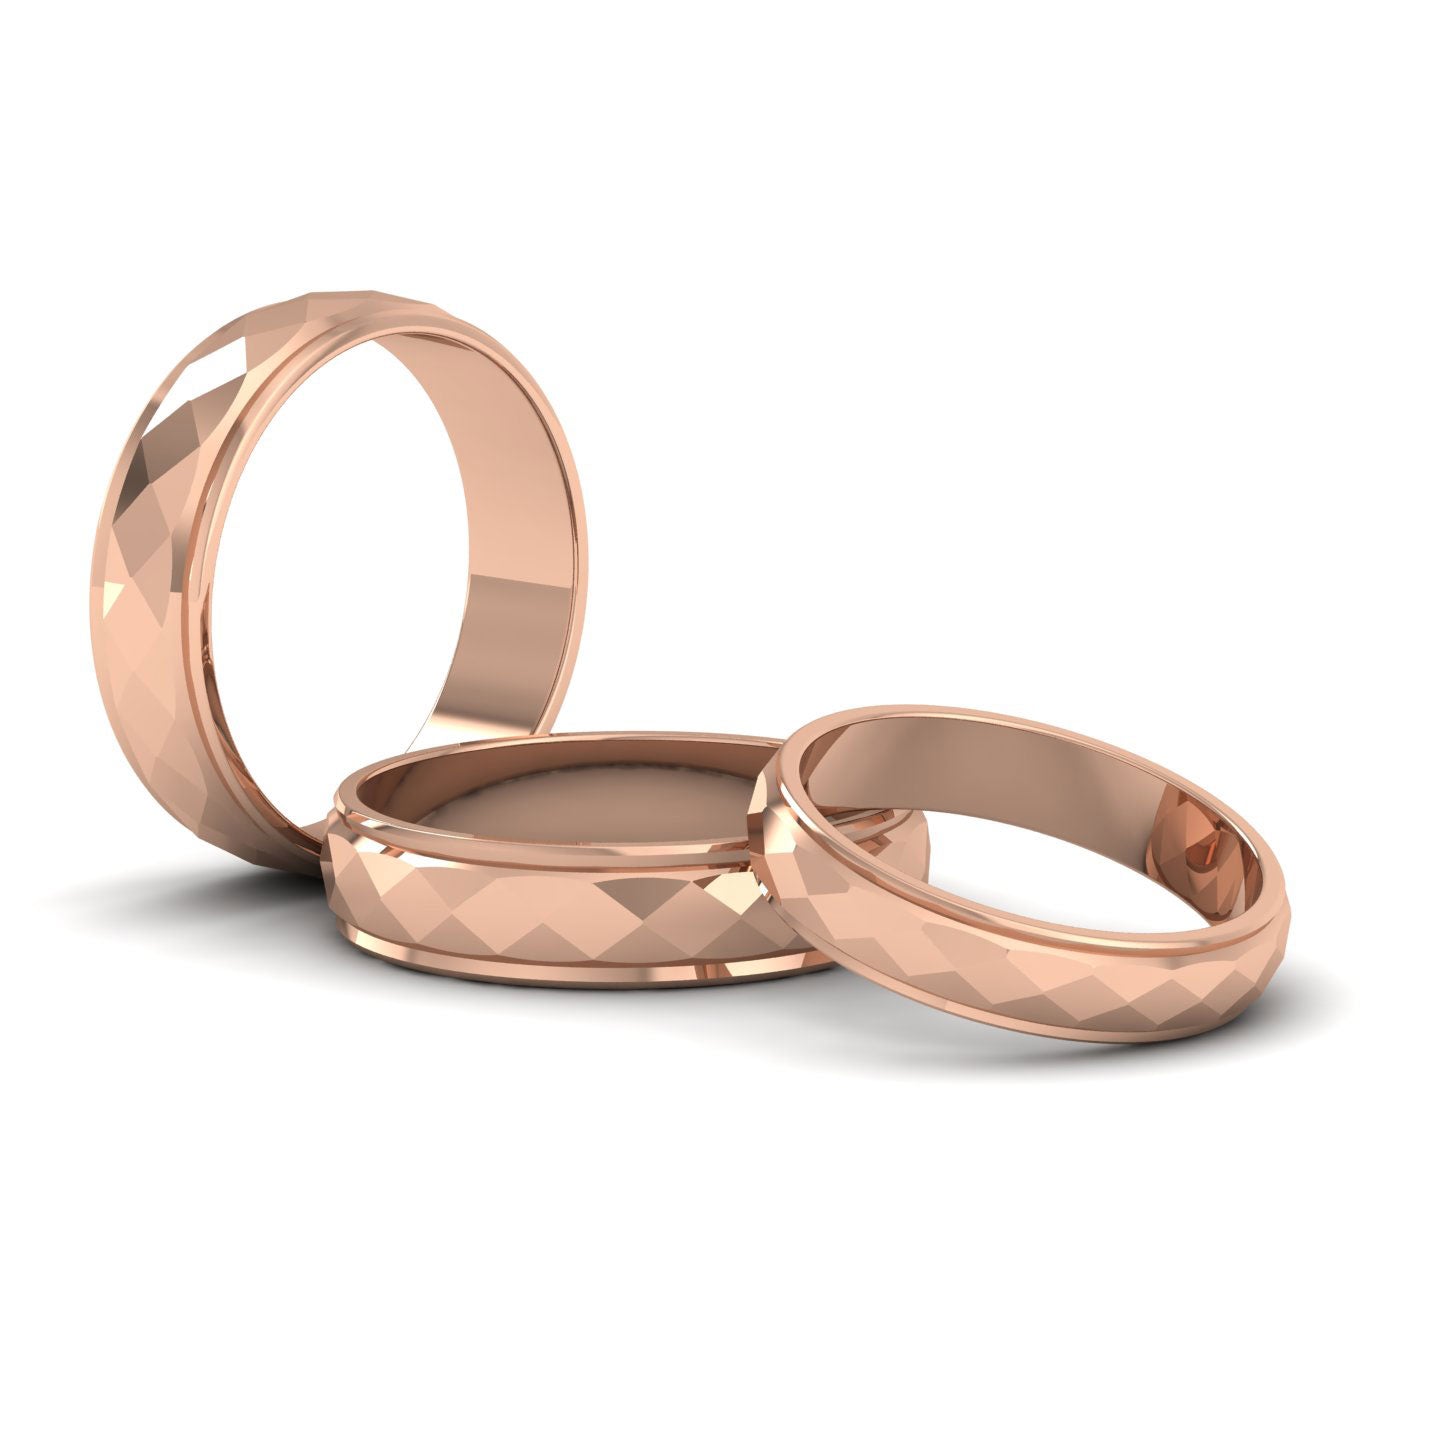 Facet And Line Pattern 9ct Rose Gold 5mm Wedding Ring